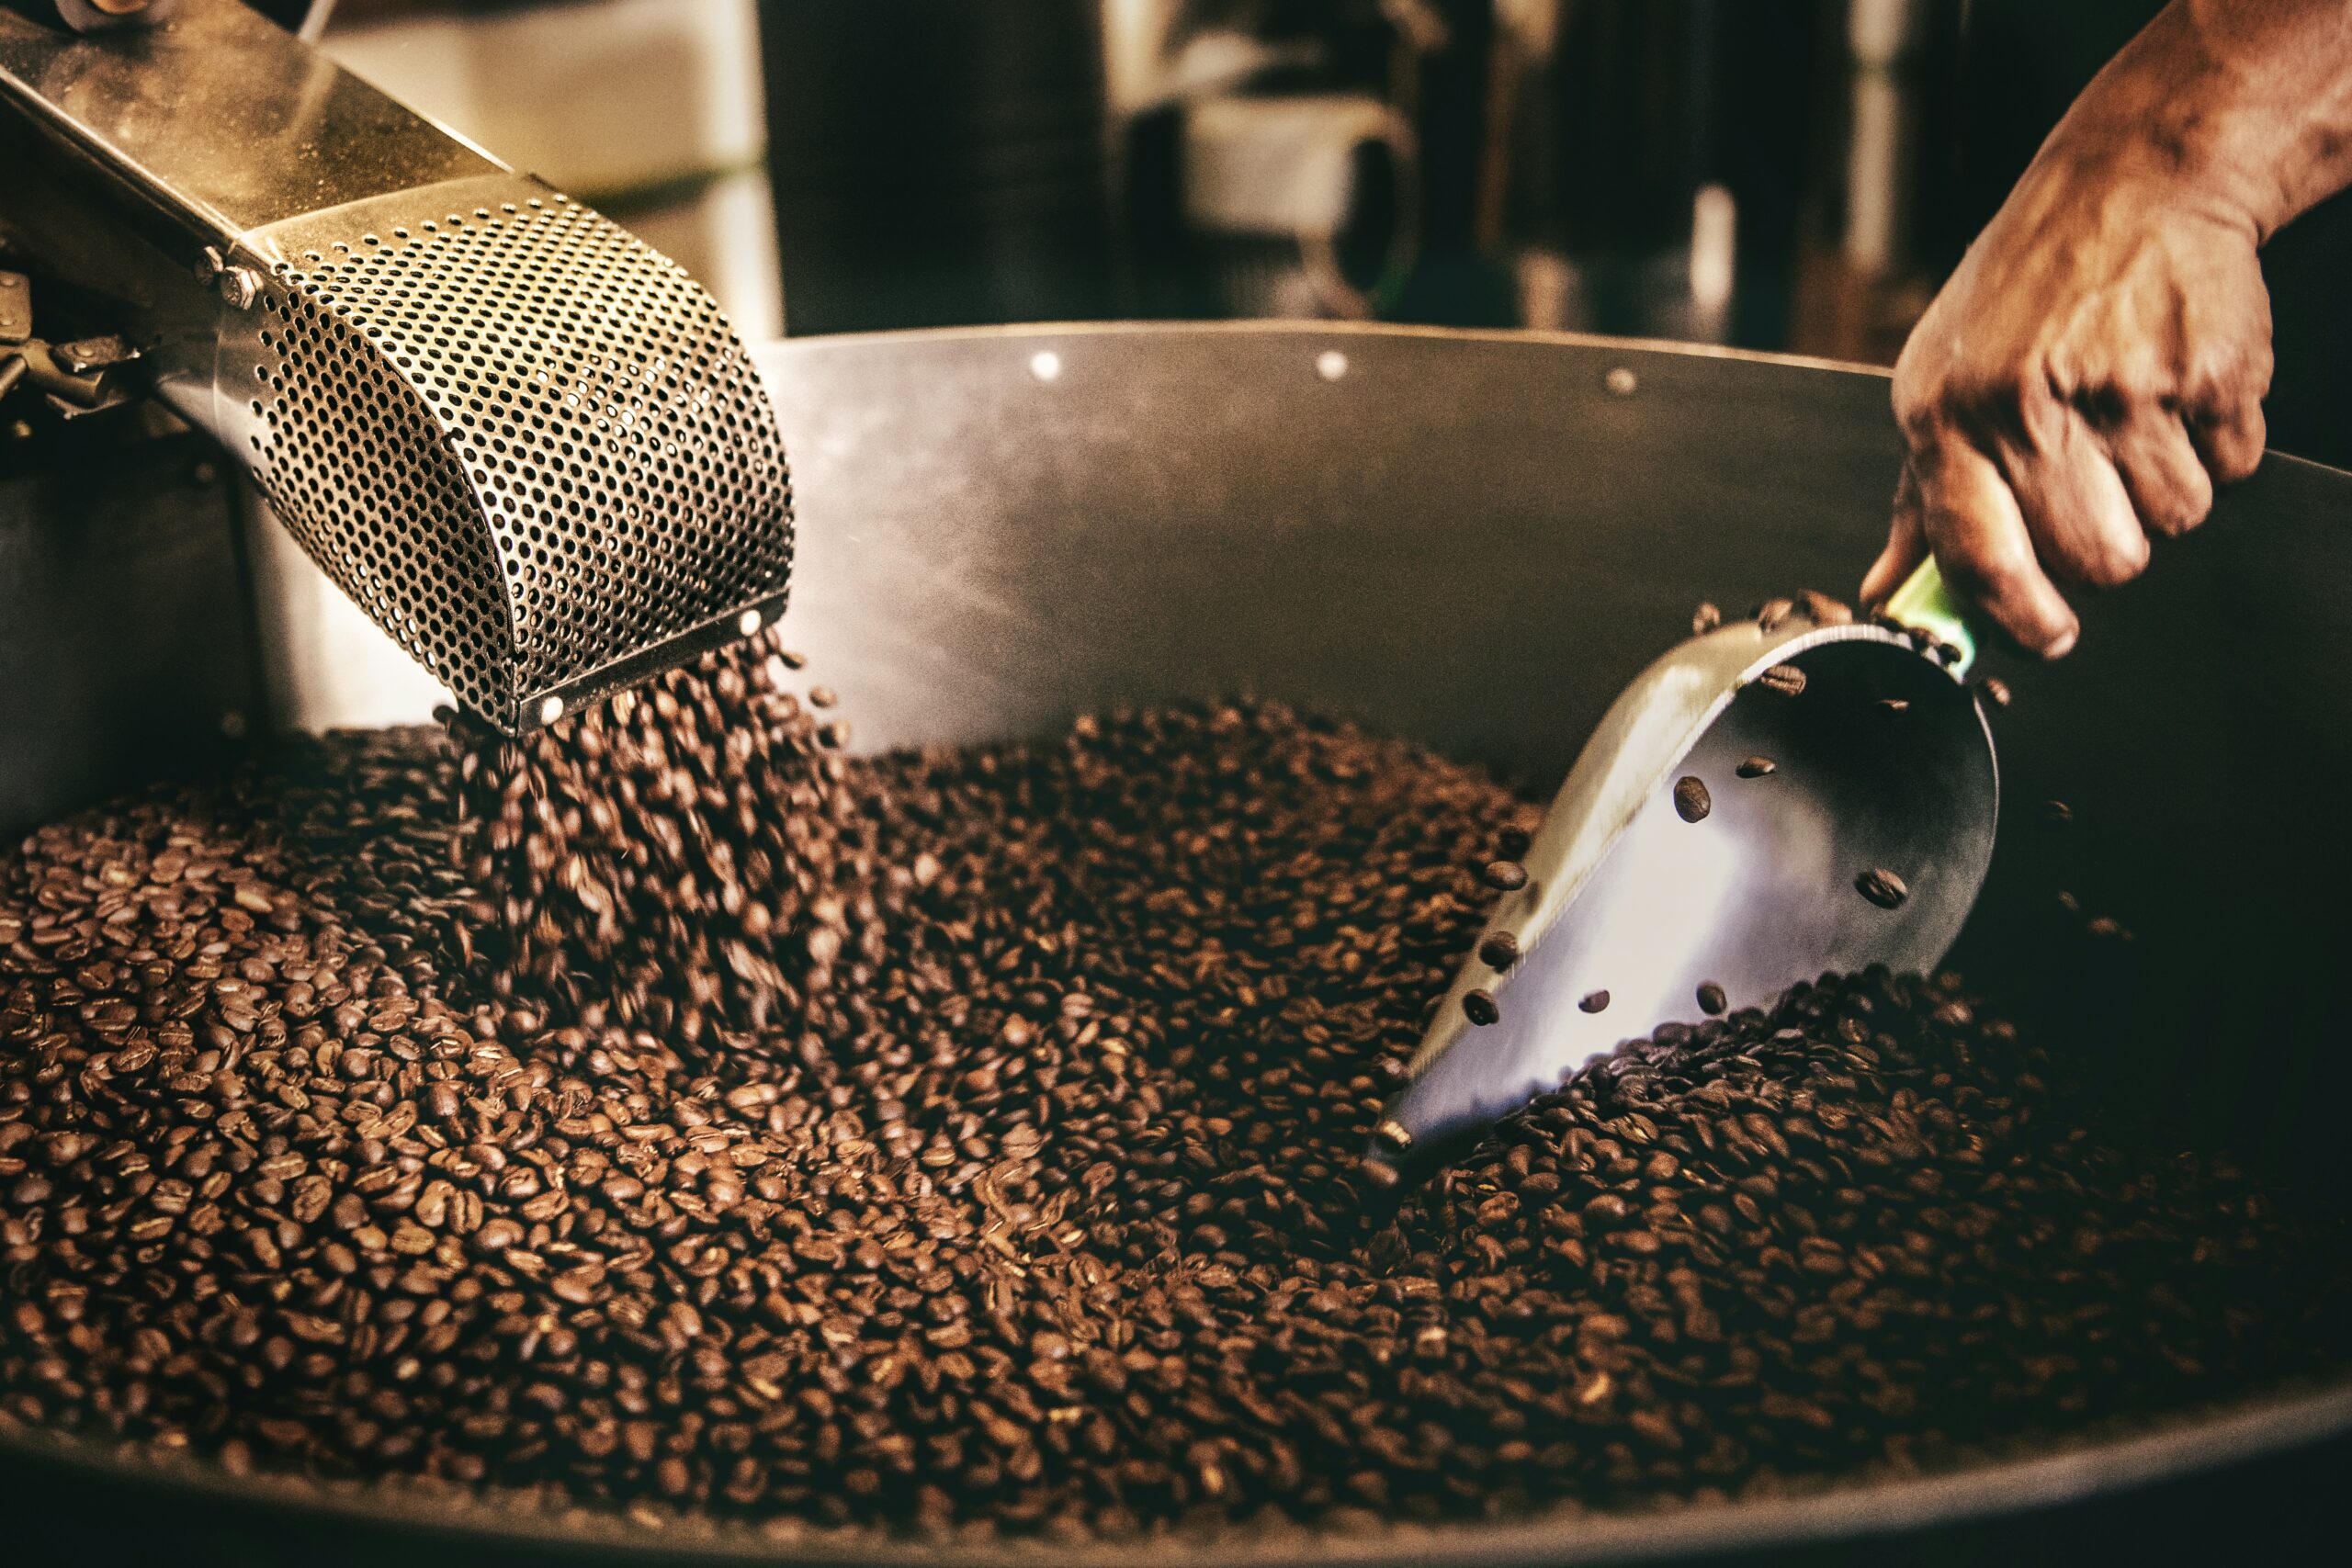 Hacienda la Esmerelda is known as one of the most expensive coffee brands. Pictured: Coffee Beans